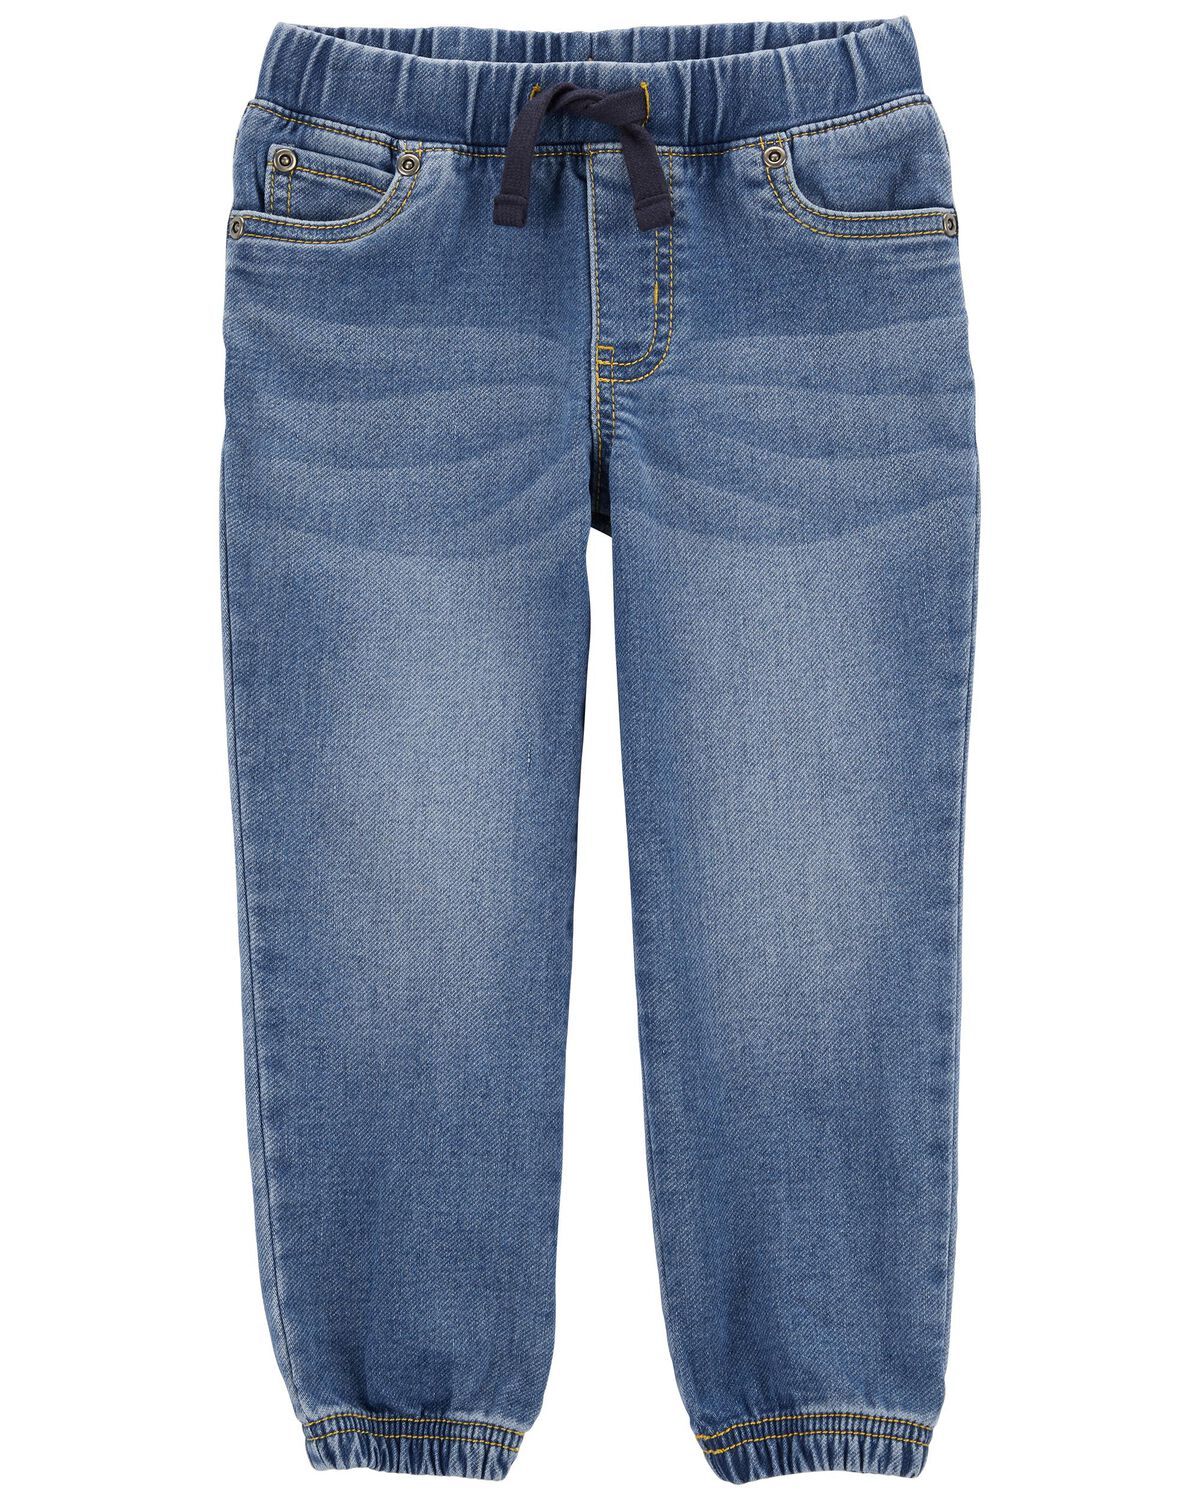 Baby Pull-On Knit Denim Pants | Carter's